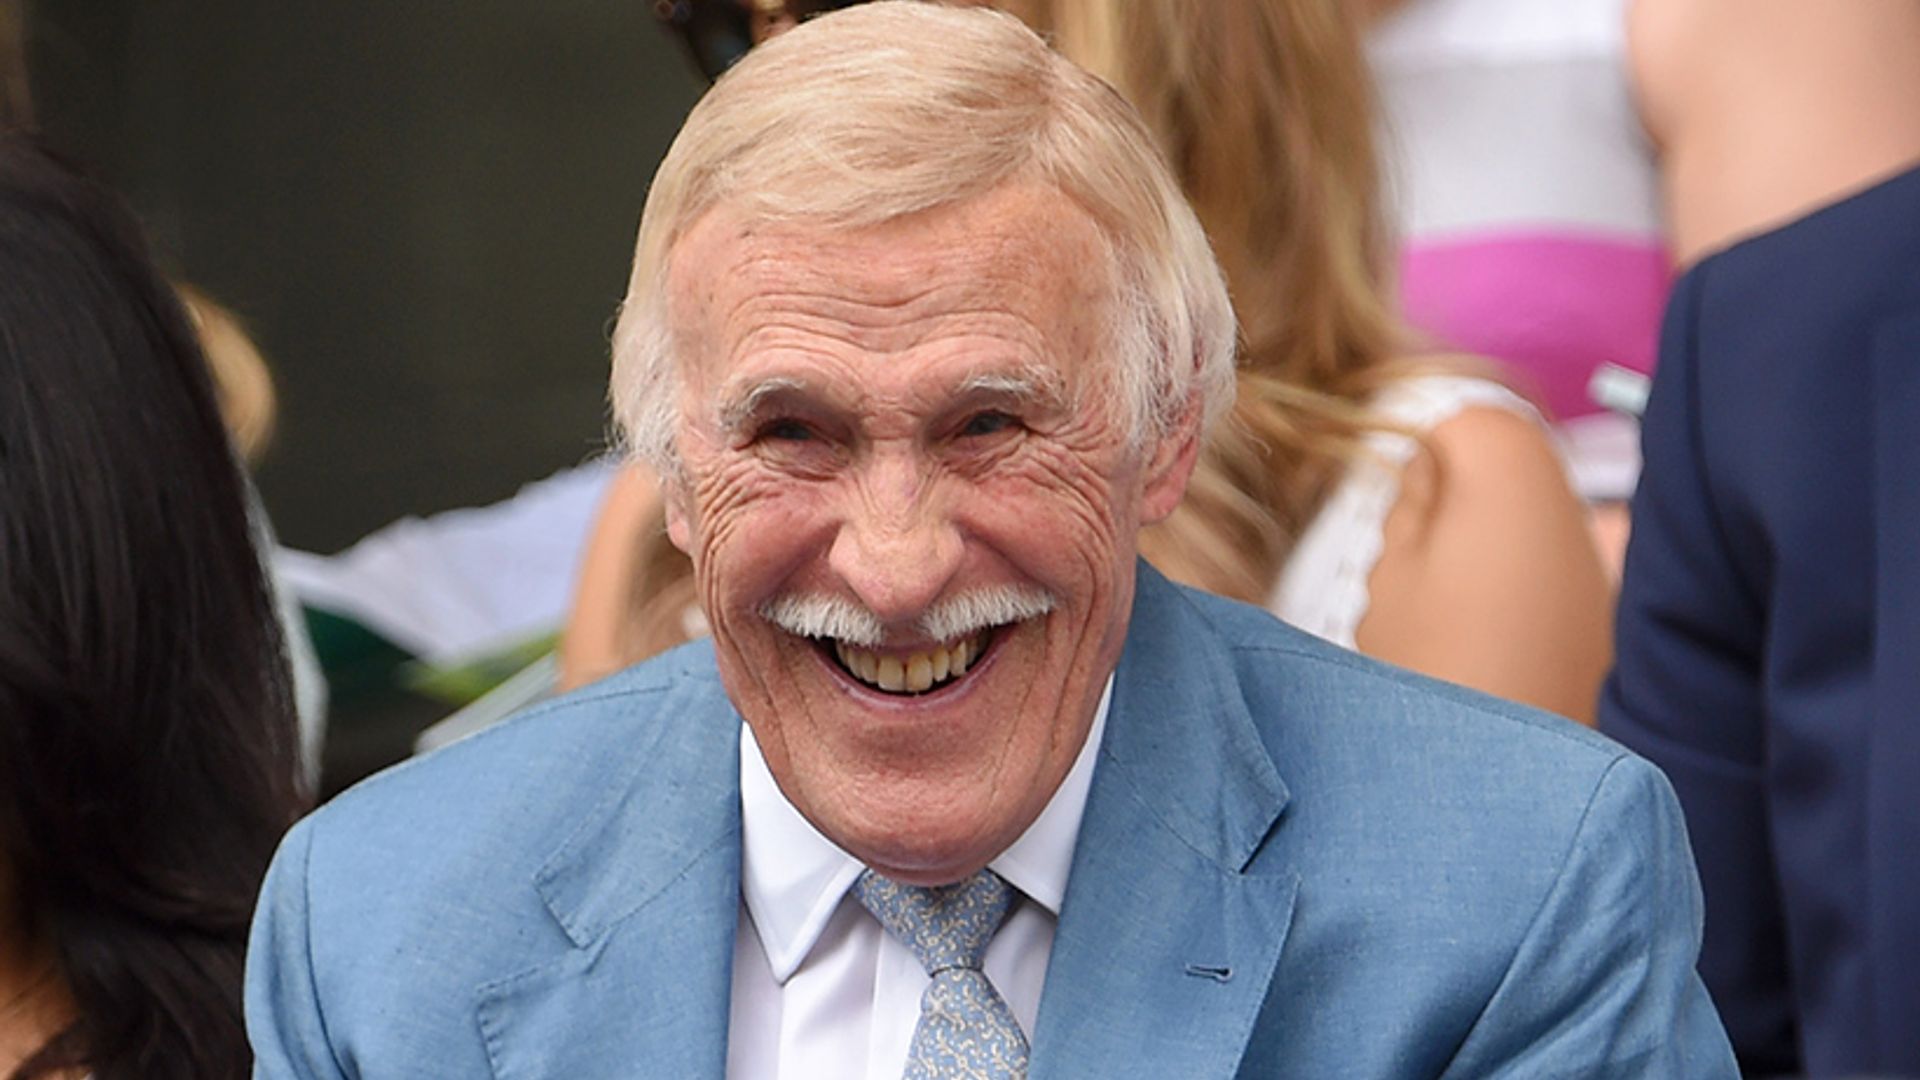 How Strictly Come Dancing will pay tribute to their dear friend Sir Bruce Forsyth